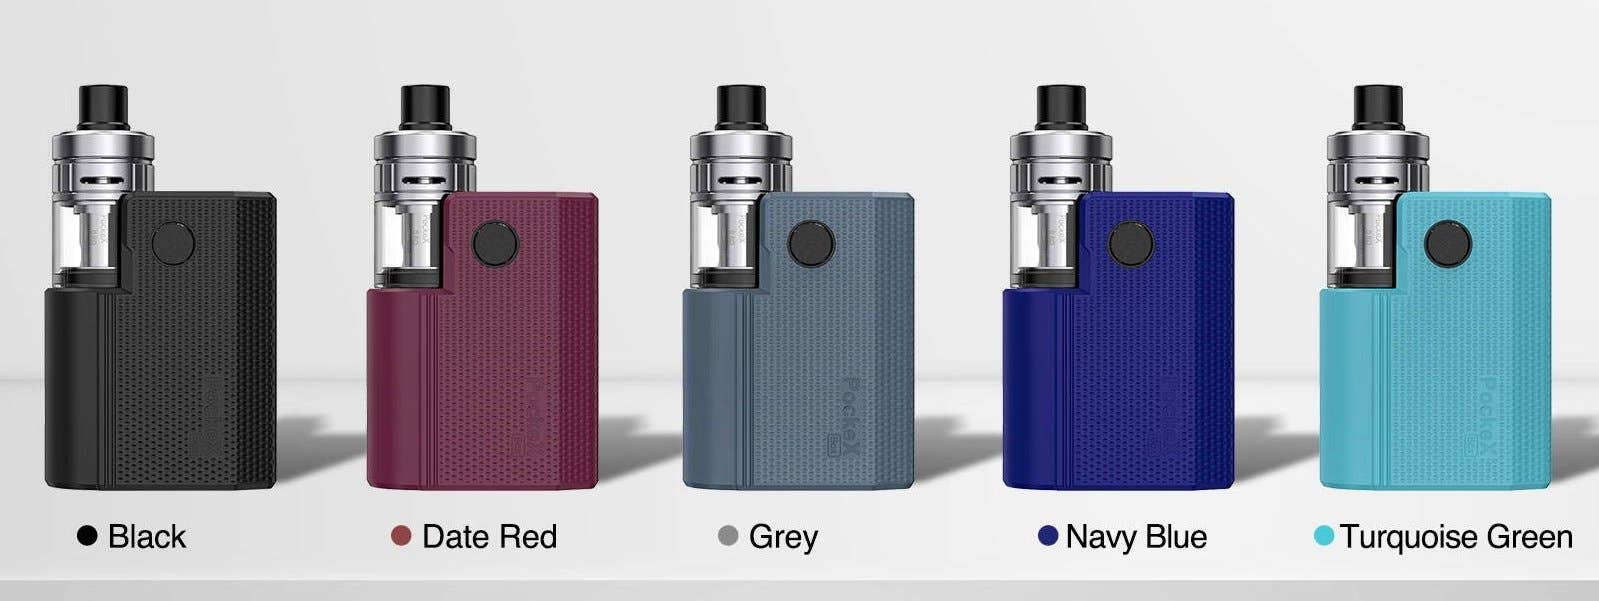 PockeX Box is available in five colour options